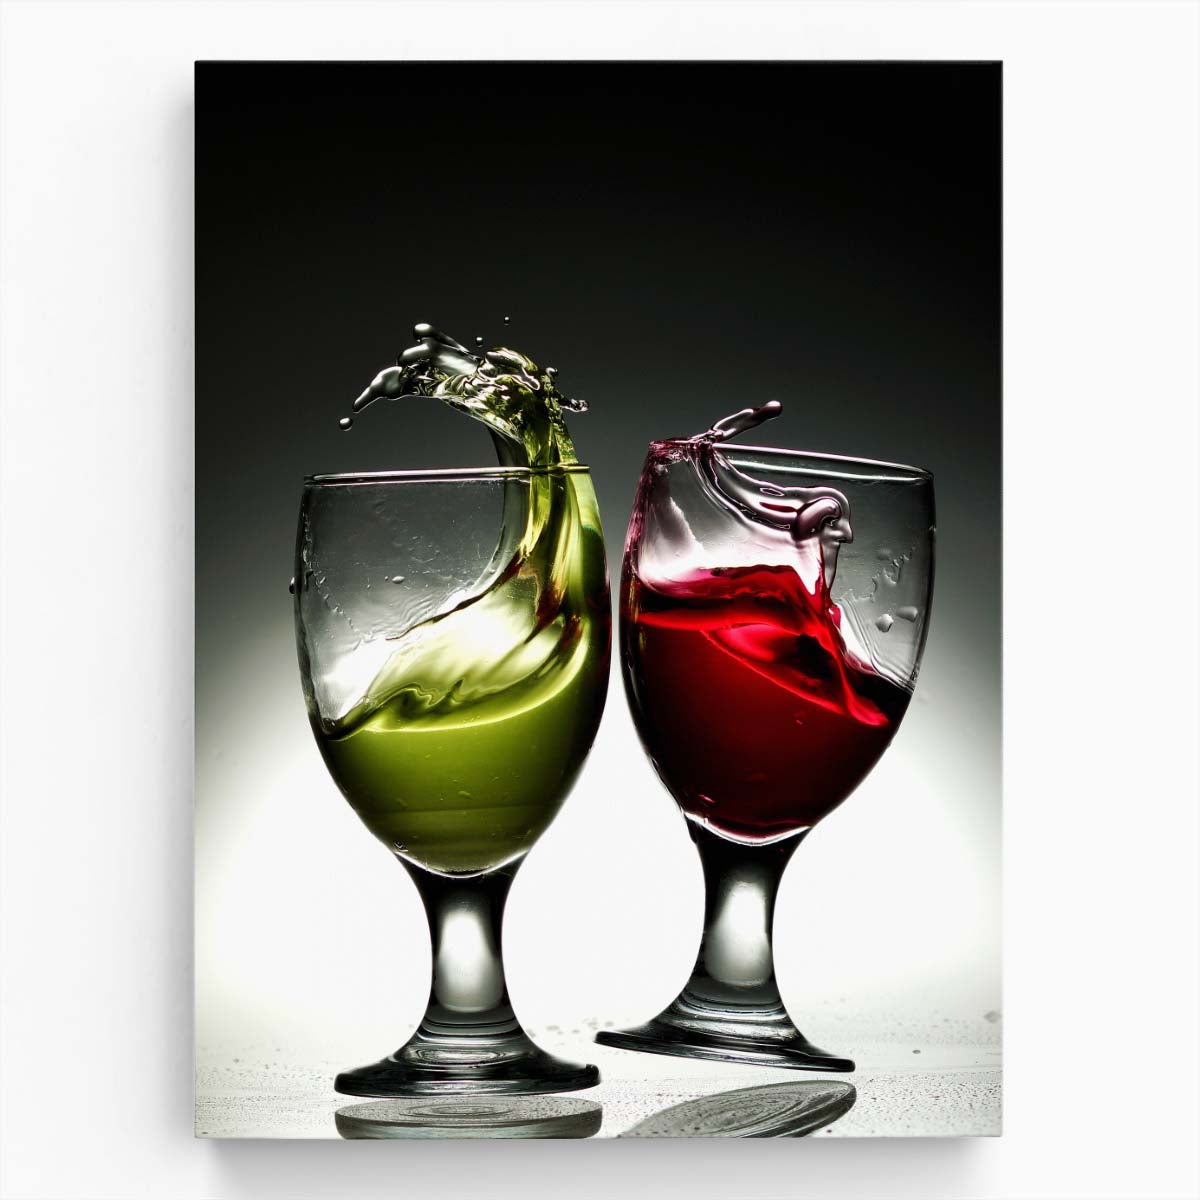 Conceptual Still Life Photography Dancing Wine Glass Splash Art by Luxuriance Designs, made in USA